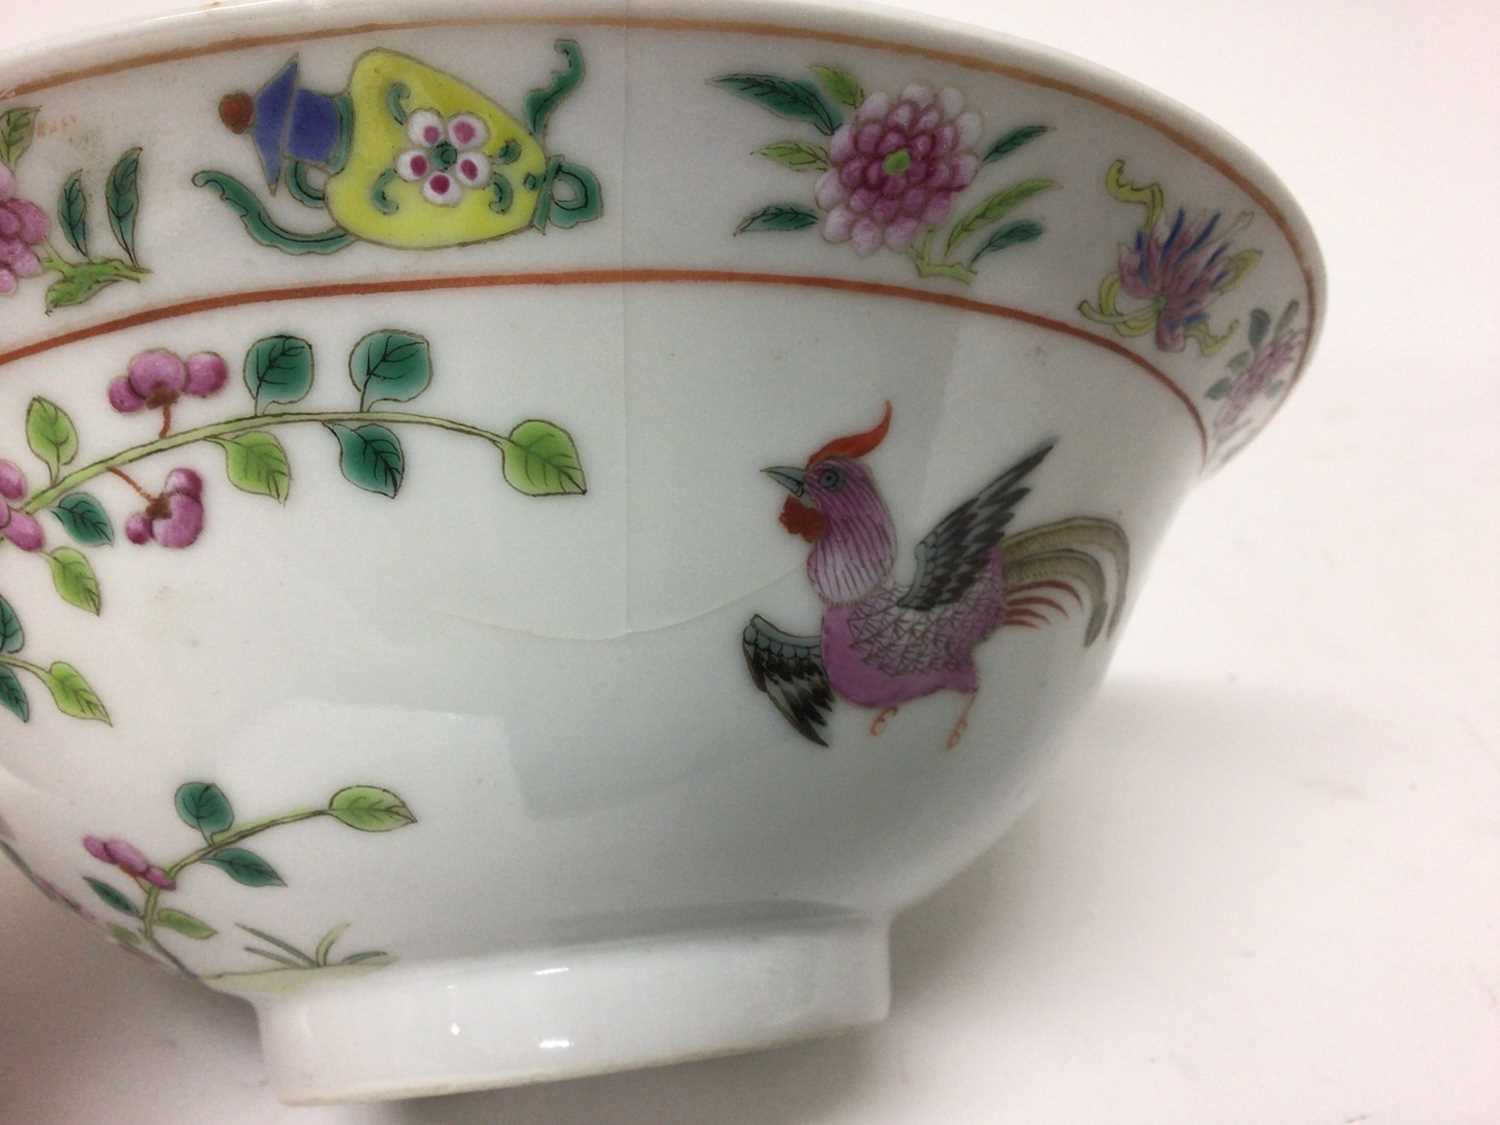 Pair of Chinese famille rose porcelain bowls, c.1900, decorated with tropical birds, flowers and aus - Image 7 of 9